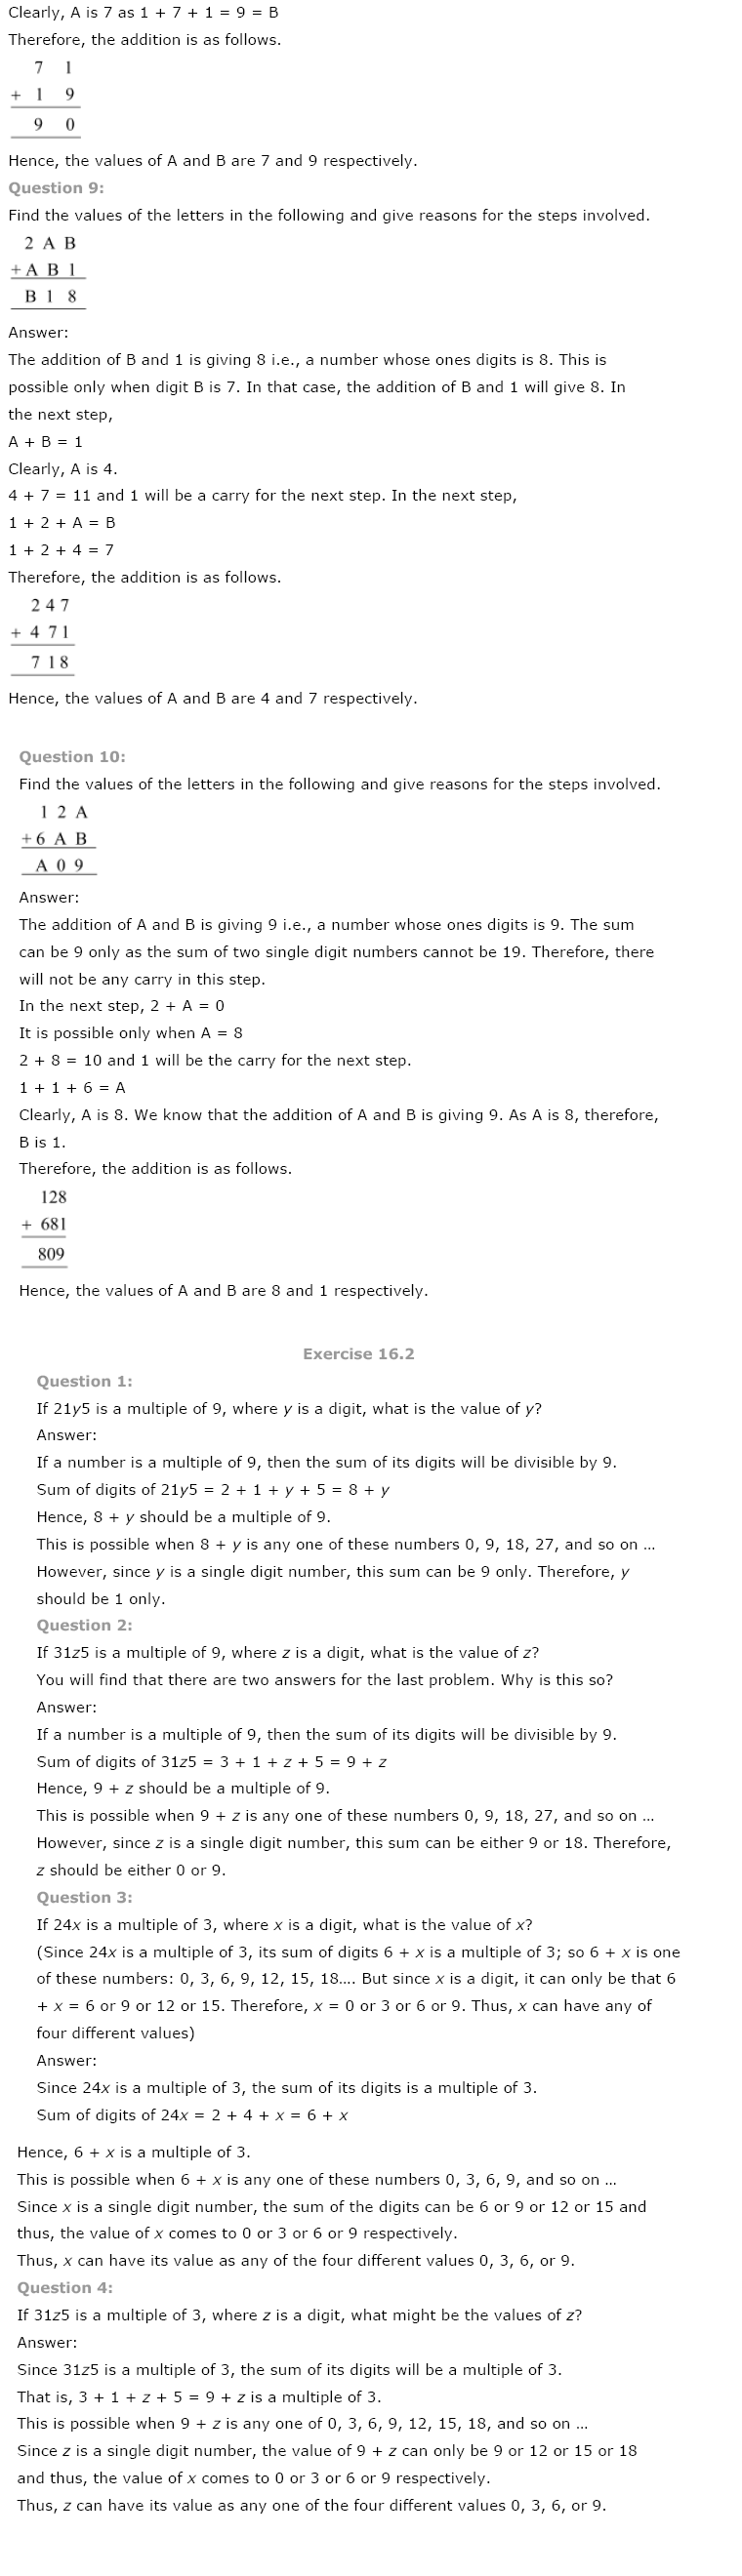 NCERT Solutions For Class 8 Maths Ch 16 Playing With Numbers PDF Download